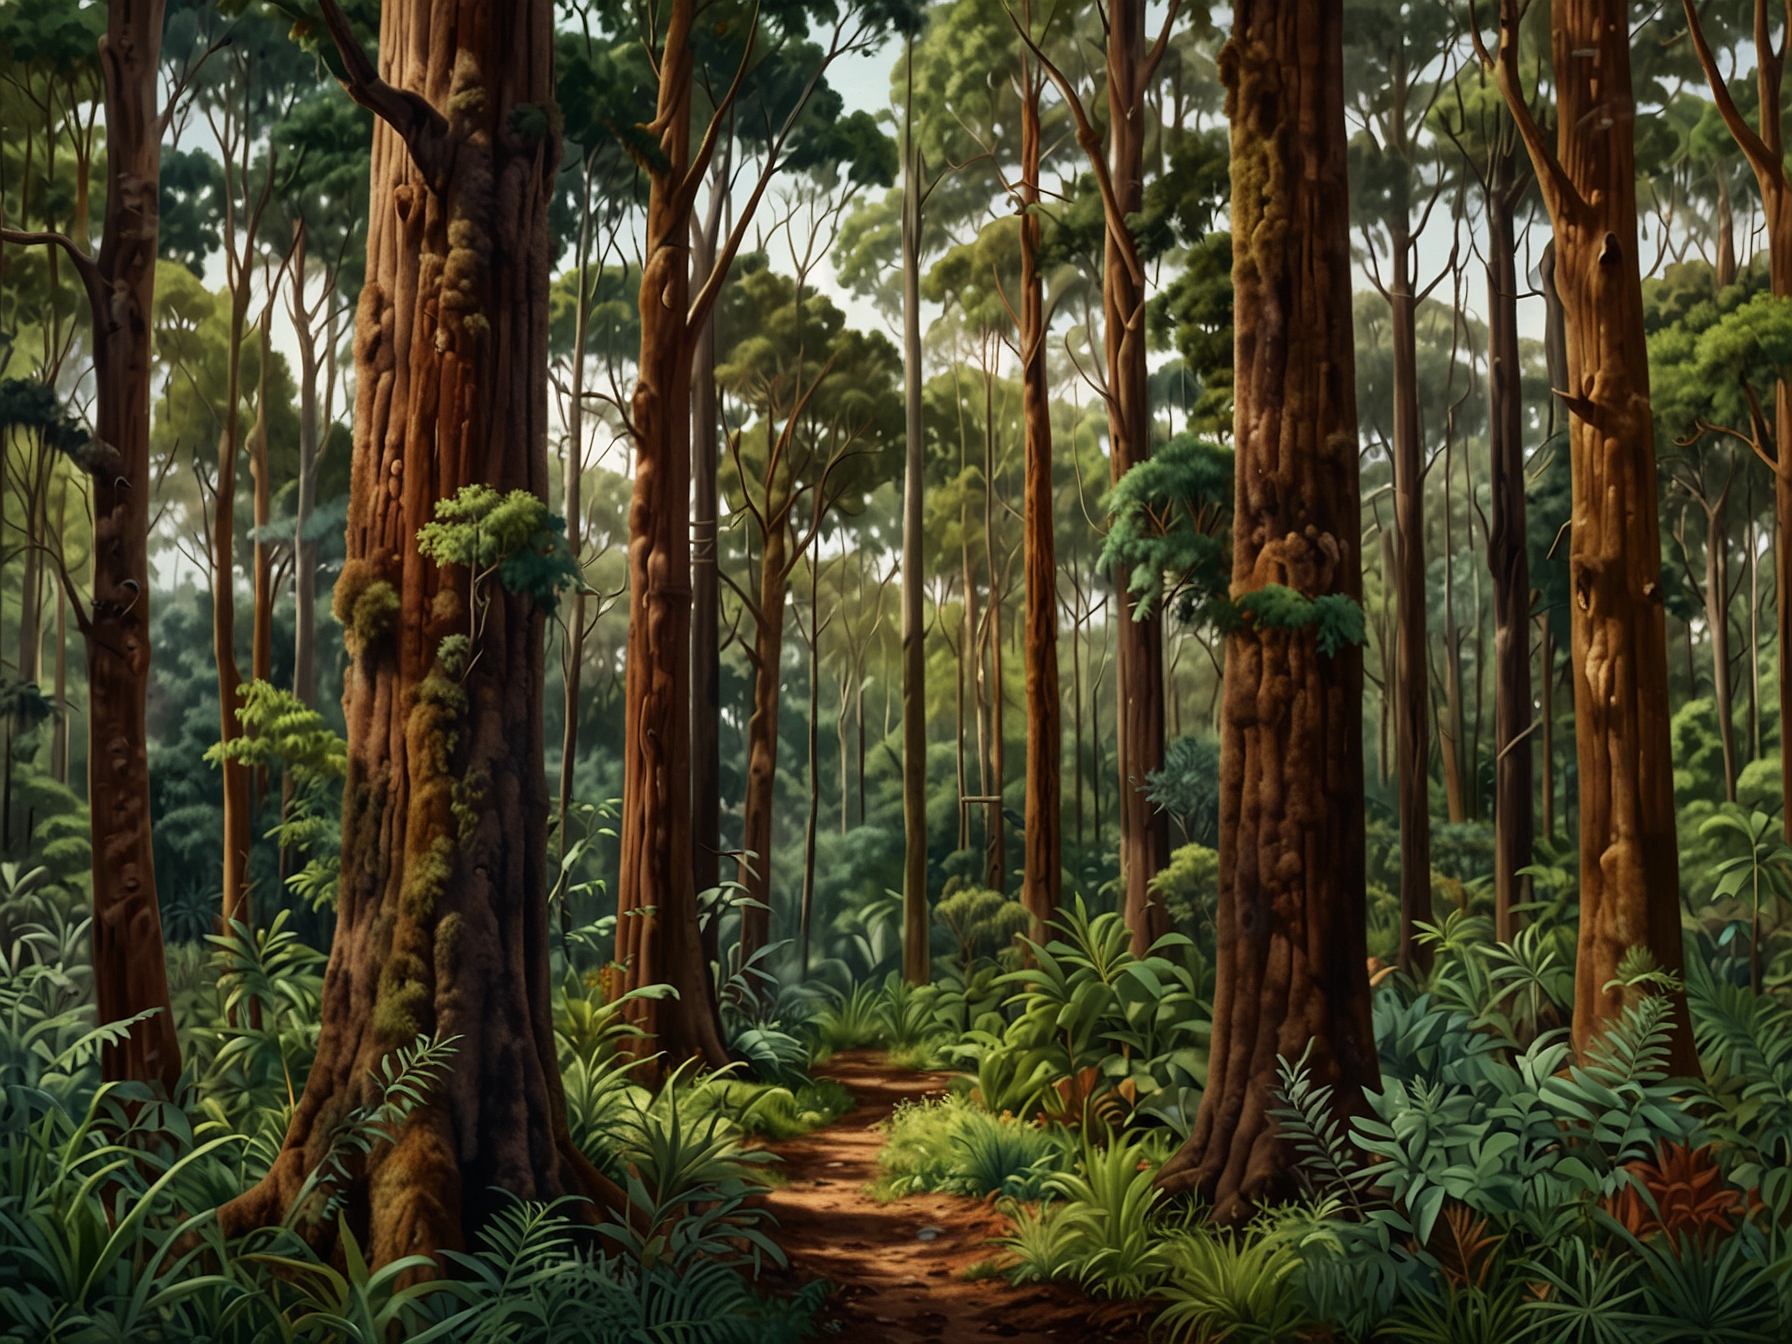 A lush, dense section of an Australian native forest showcasing tall eucalypt trees, vibrant mosses, and a variety of other vegetation, highlighting the ecosystem's richness and biodiversity.